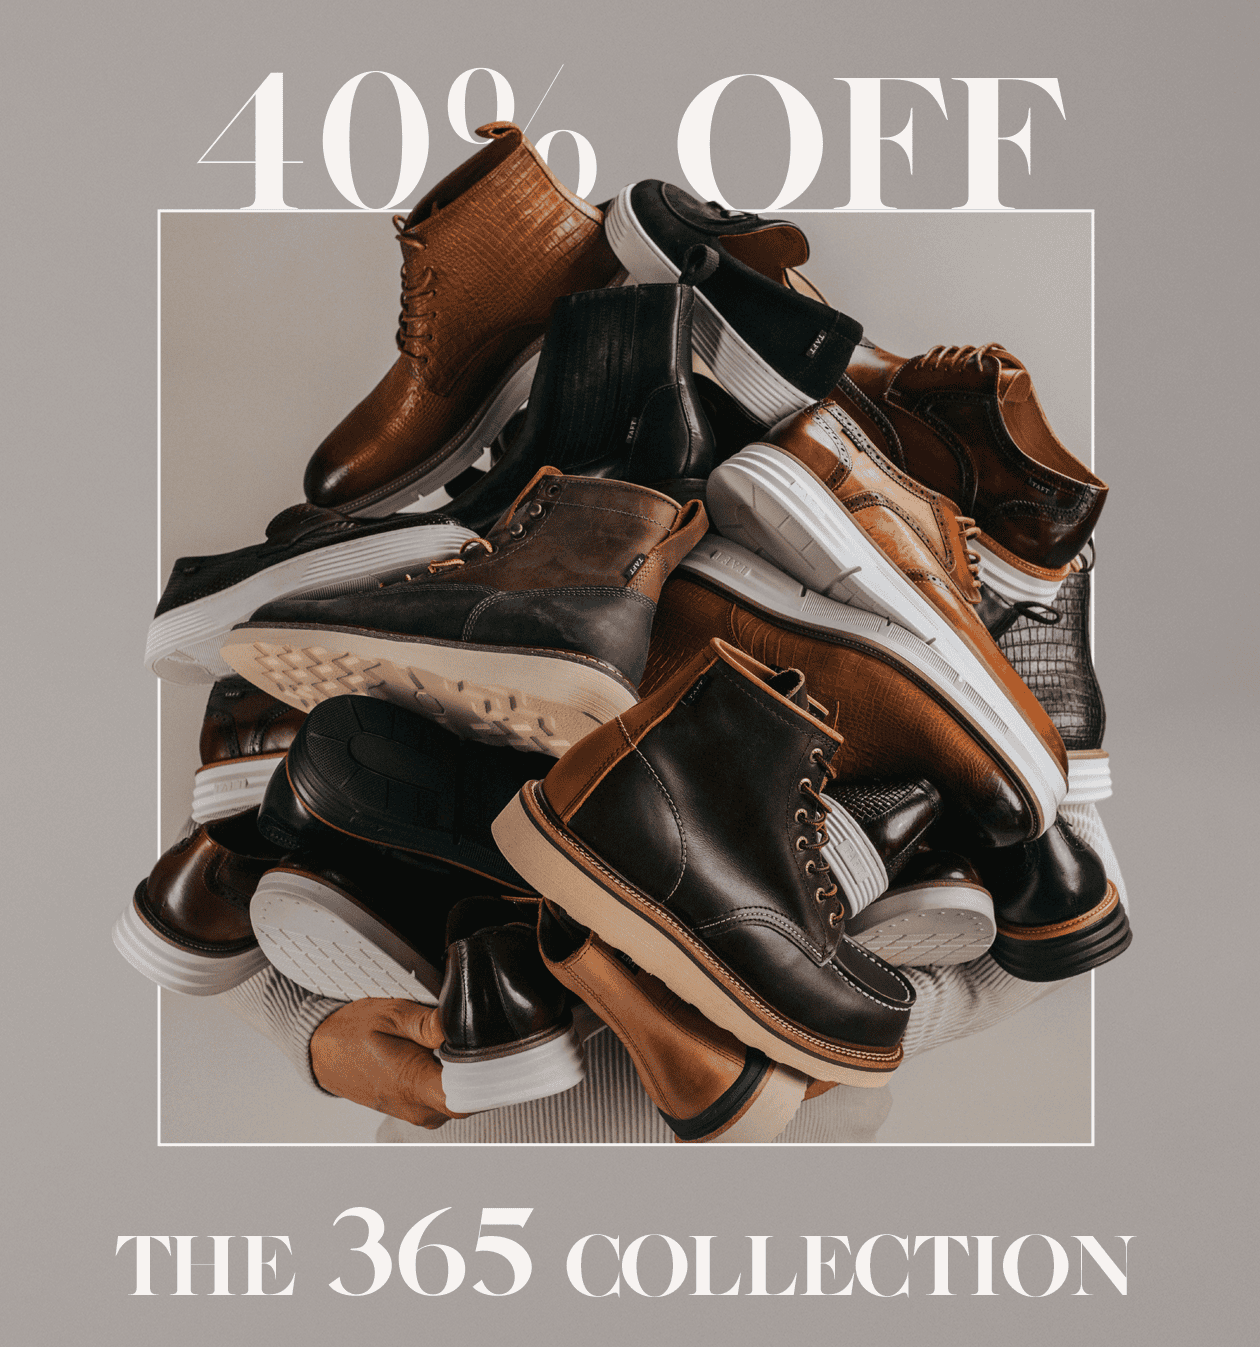 40% off the 365 Collection